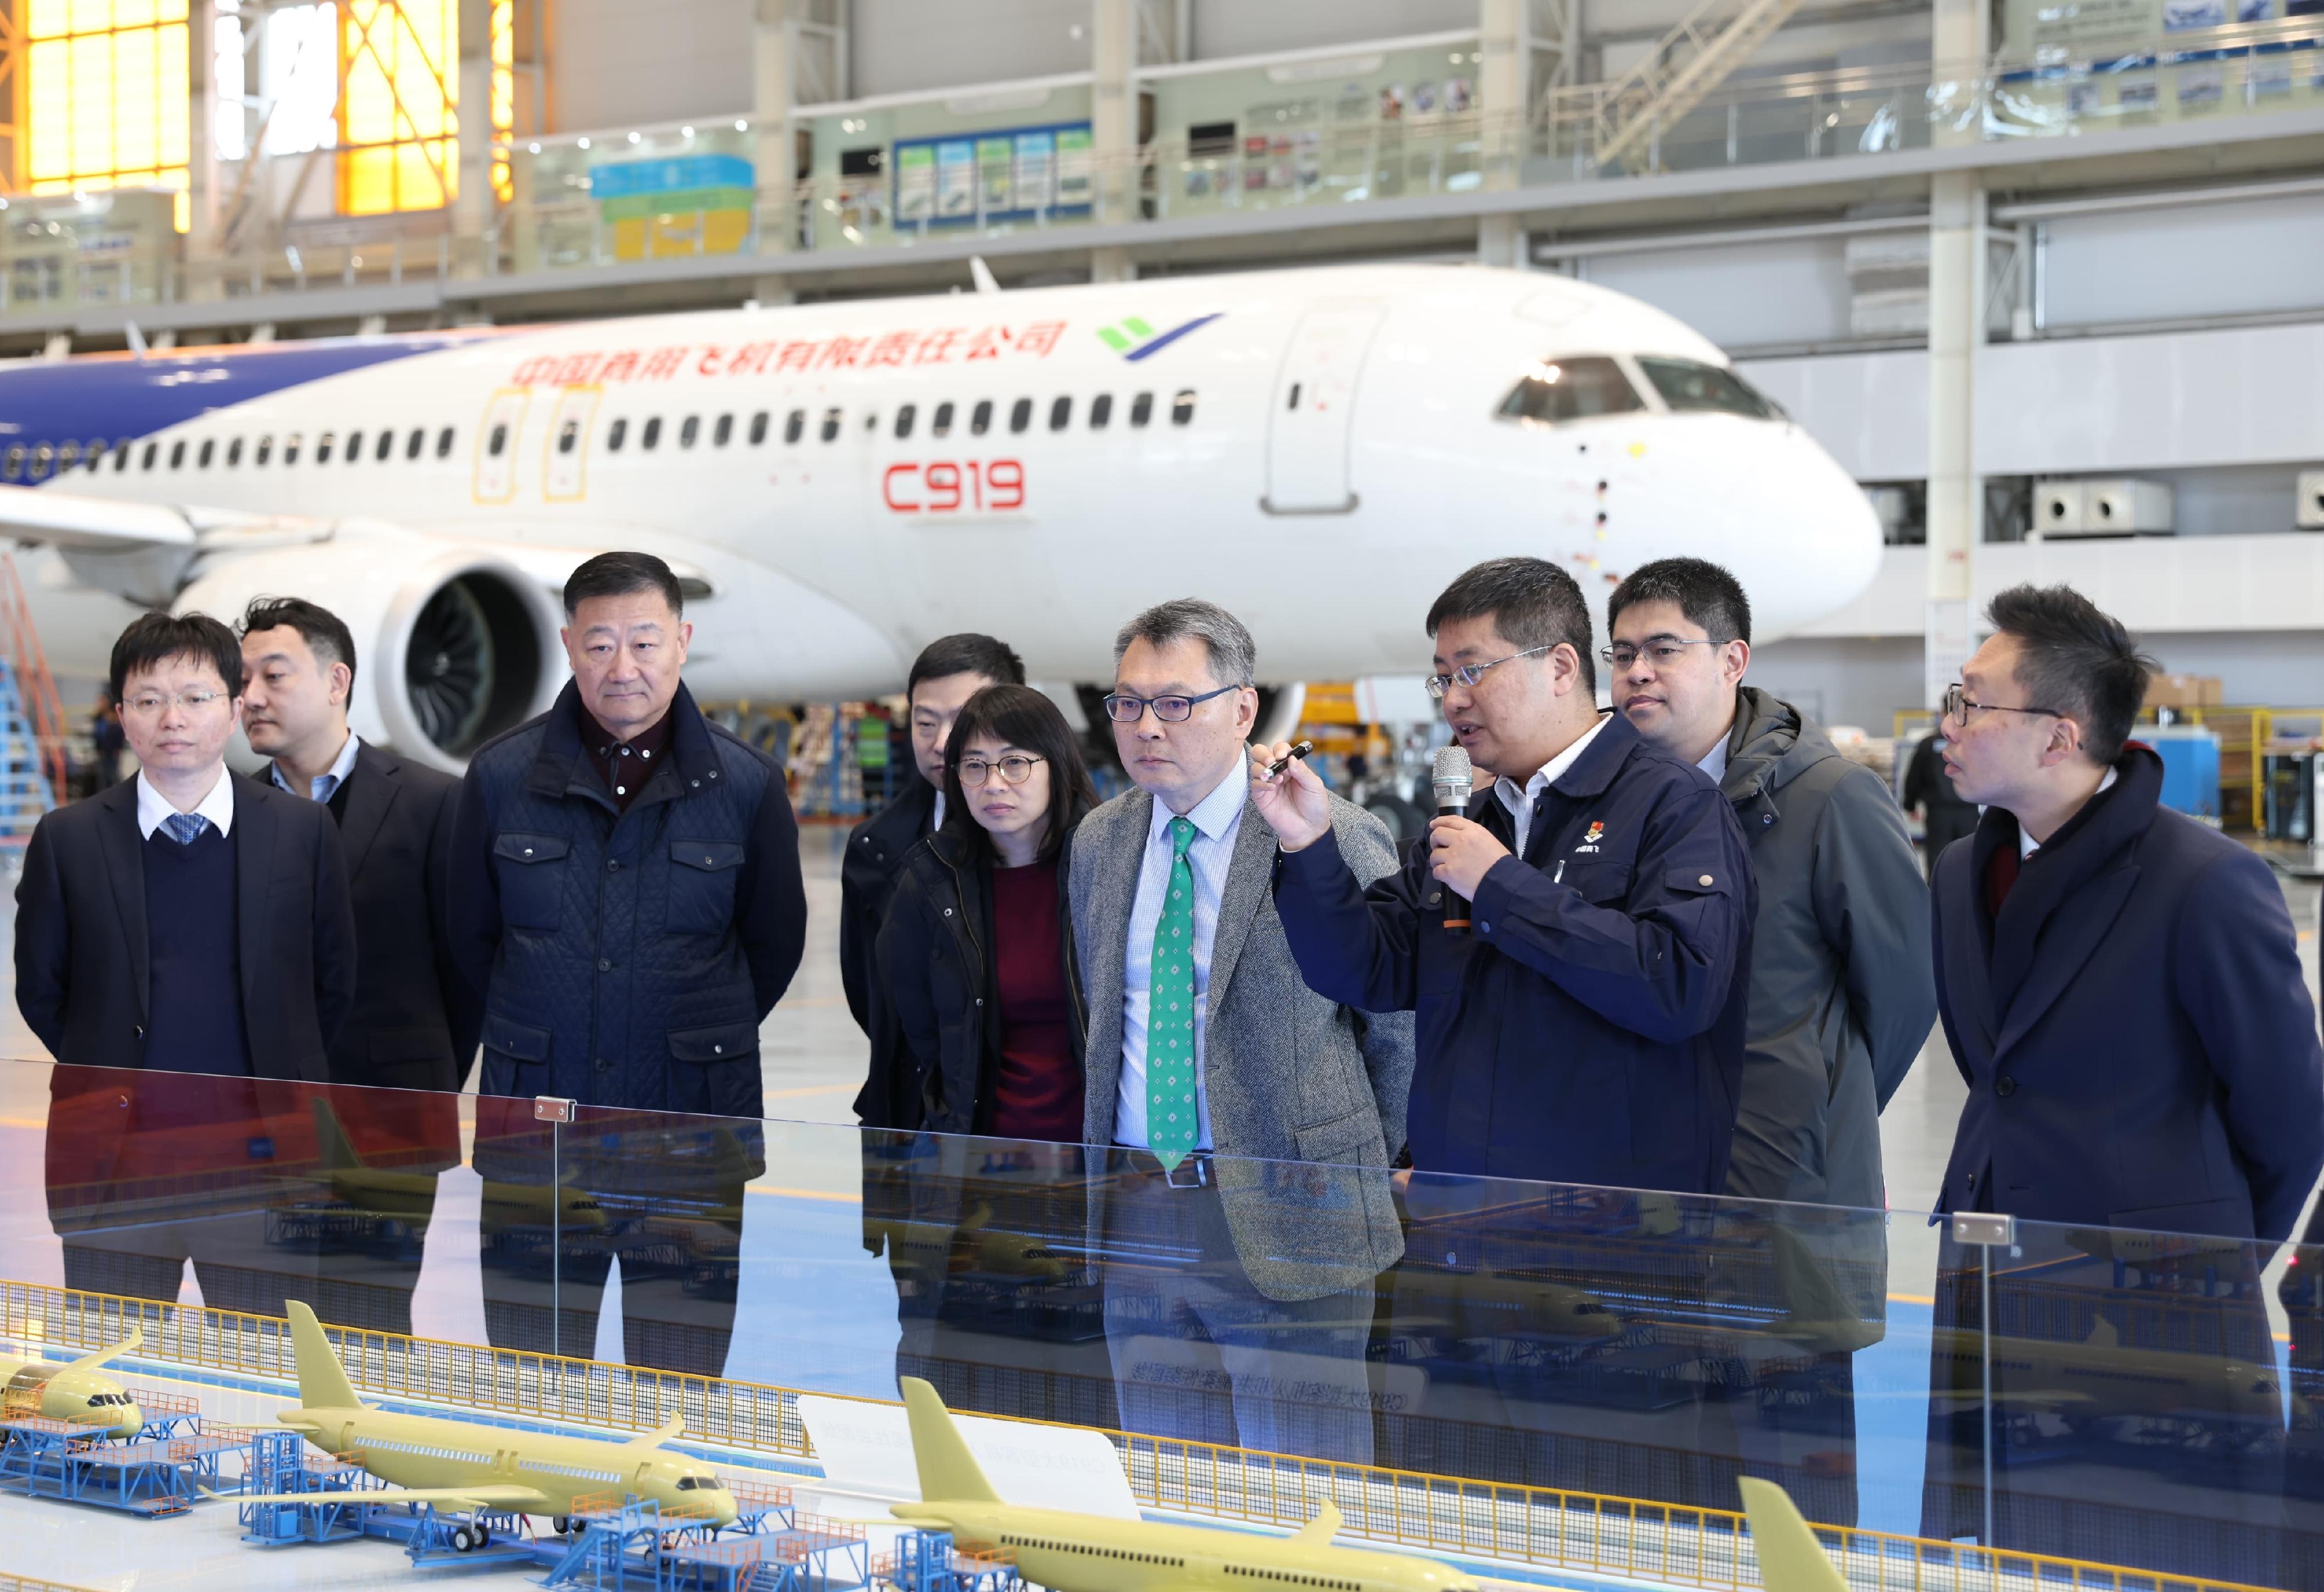 The Director-General of Civil Aviation, Mr Victor Liu (fourth right), visits the Commercial Aircraft Corporation of China, Ltd to understand the latest developments and exchange views on various aviation topics during his visit to Shanghai between January 15 and 17.